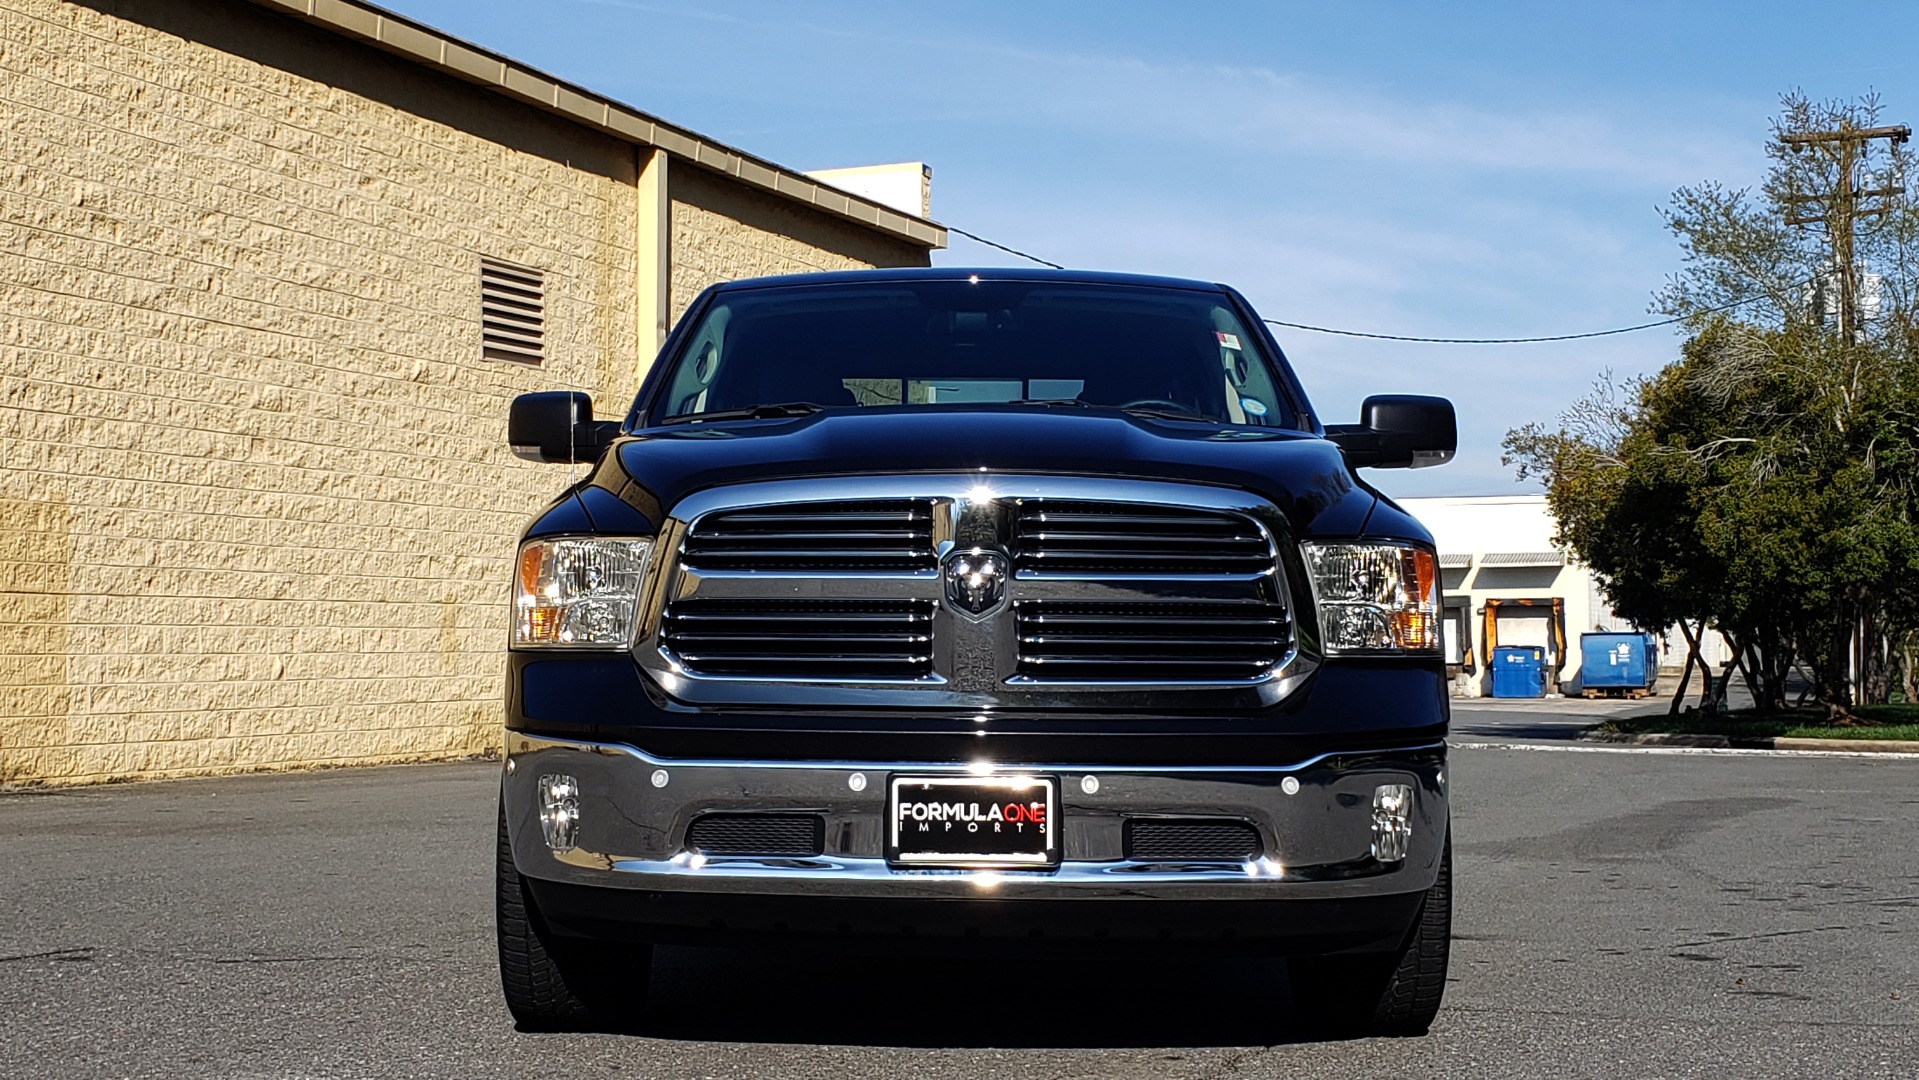 Used 2017 Ram 1500 BIG HORN CREW CAB 4X4 / 3.6L V6 / 8-SPD AUTO / WIFI HOTSPOT for sale Sold at Formula Imports in Charlotte NC 28227 13